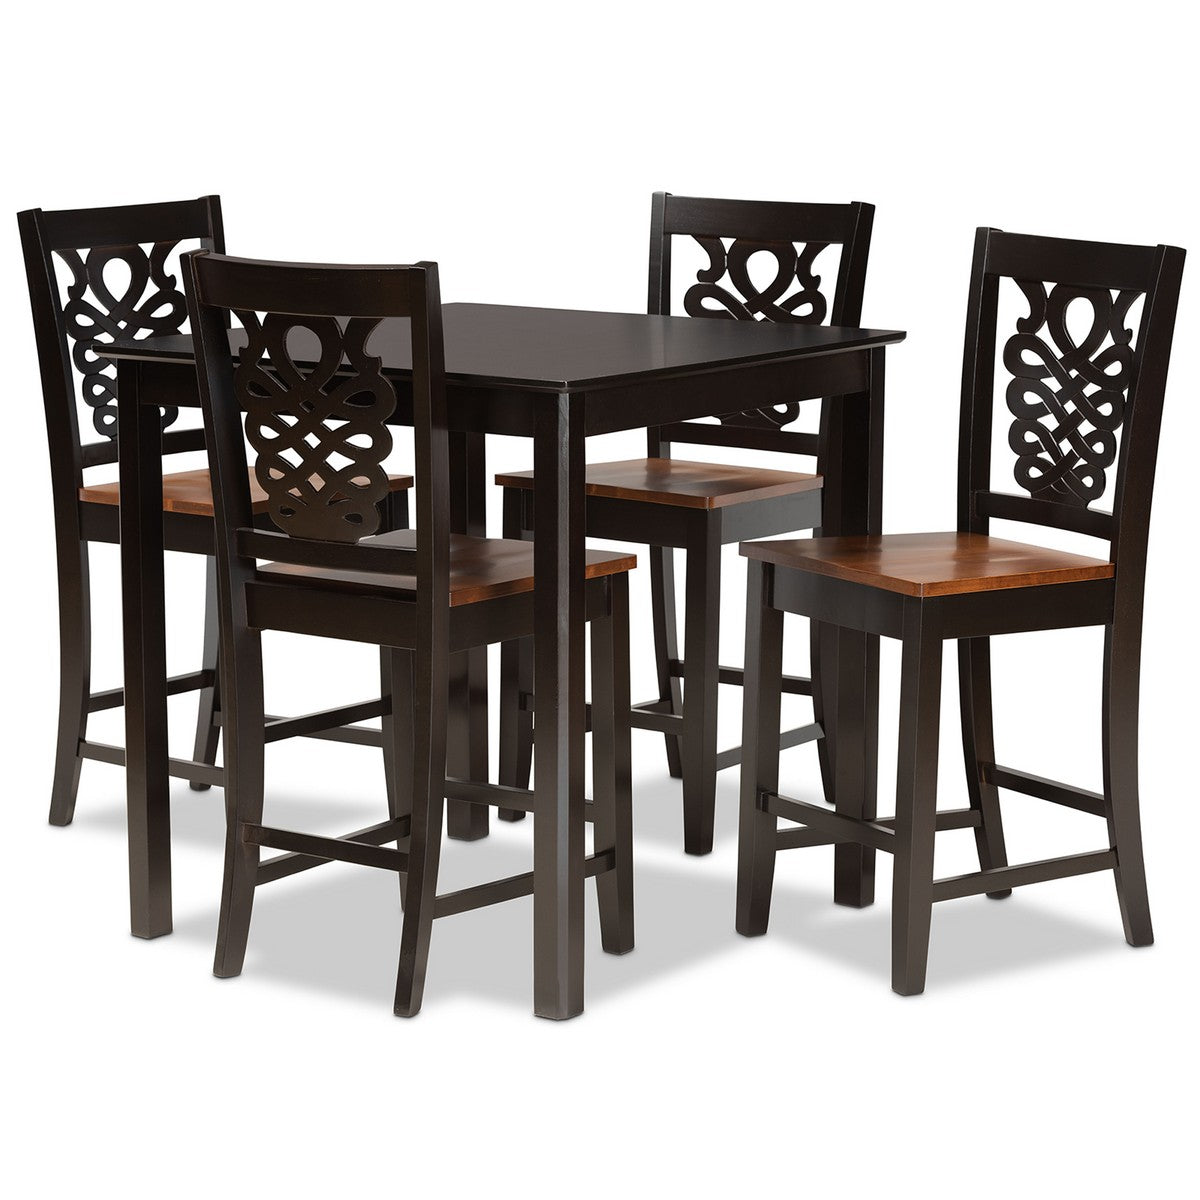 Baxton Studio Gervais Modern and Contemporary Transitional Two-Tone Dark Brown and Walnut Brown Finished Wood 5-Piece Pub Set Baxton Studio-Pub Sets-Minimal And Modern - 1